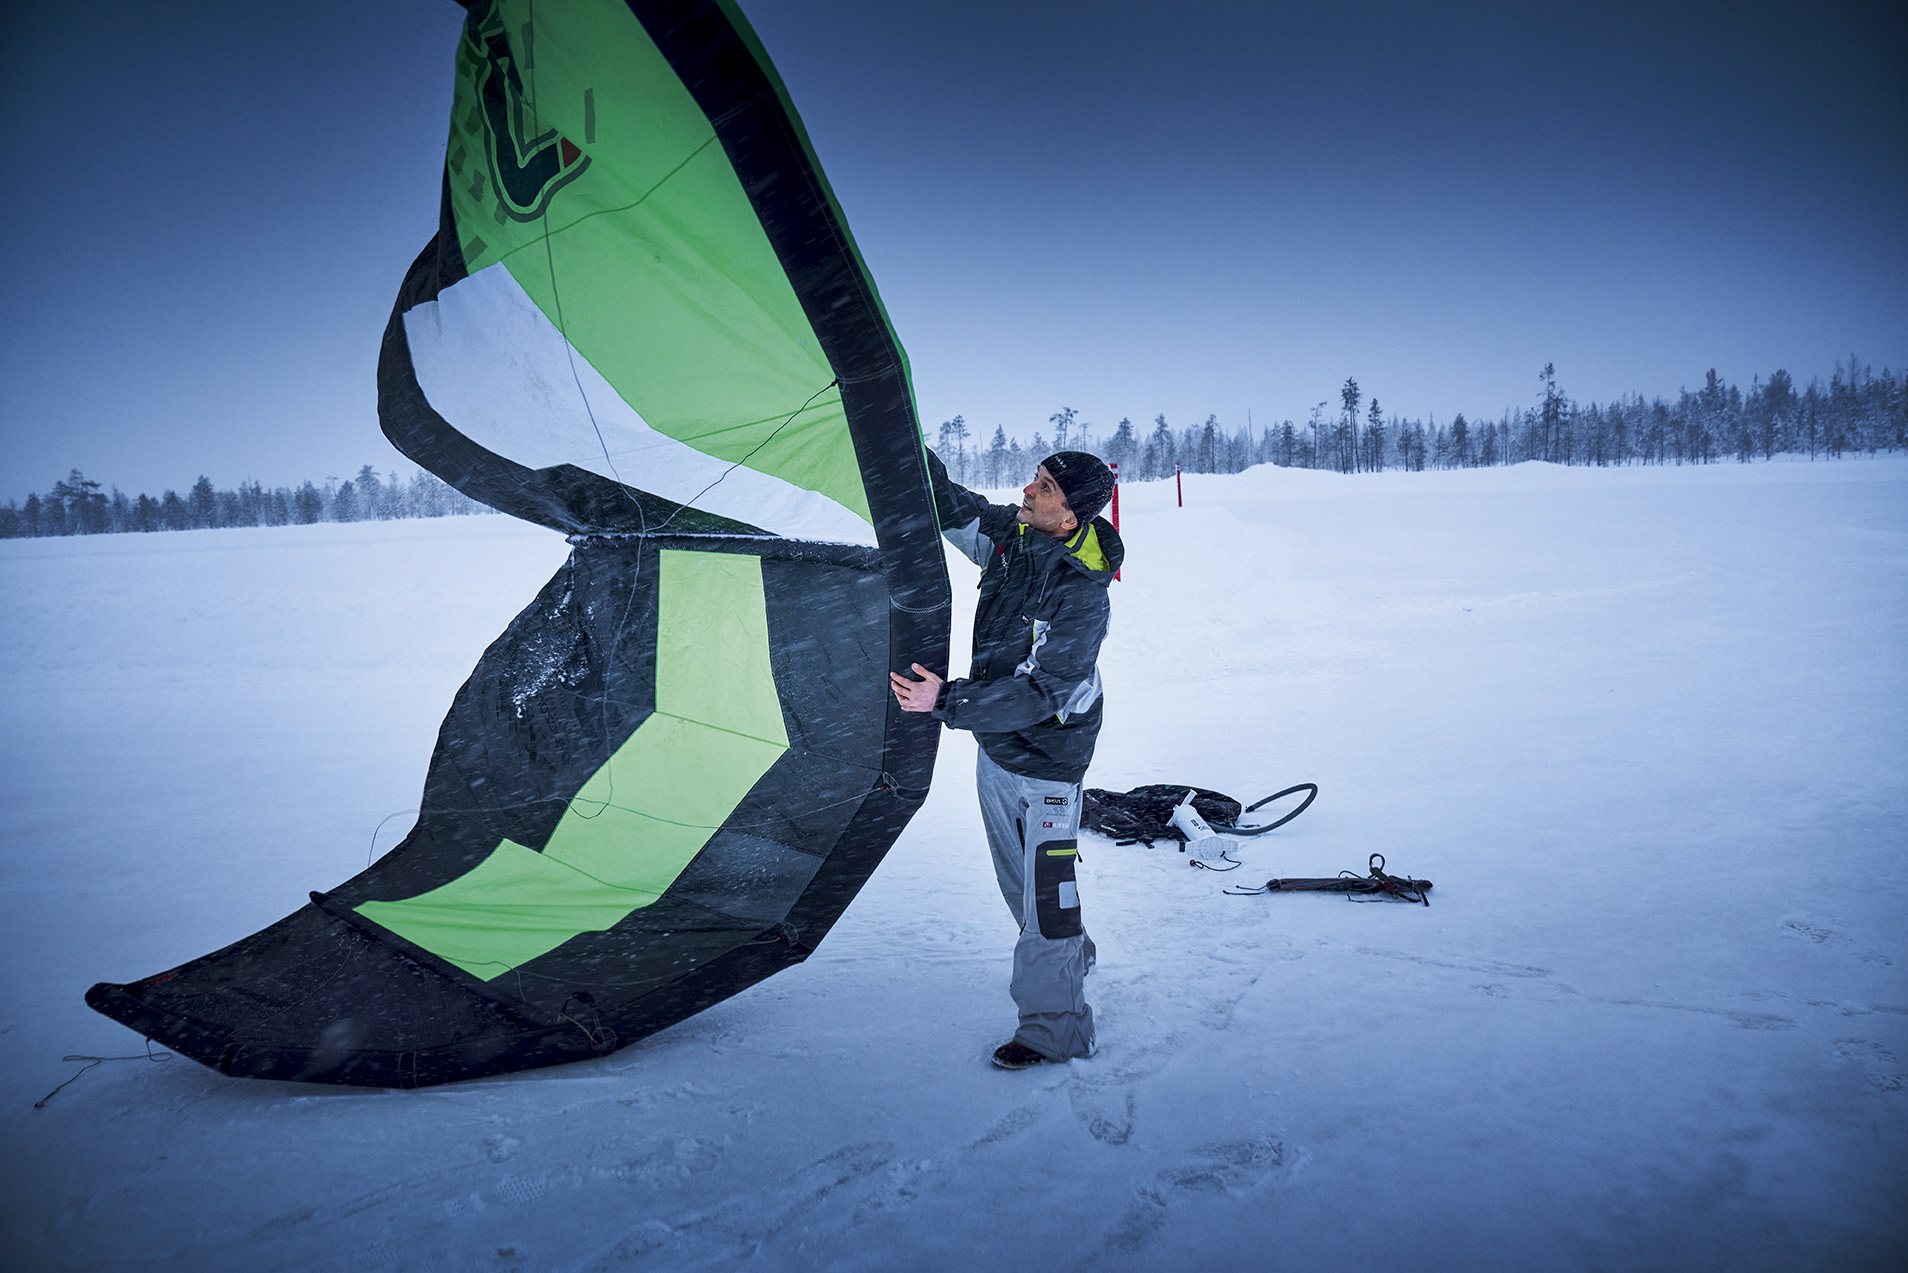 Wind conditions are best in the morning for snowkiting